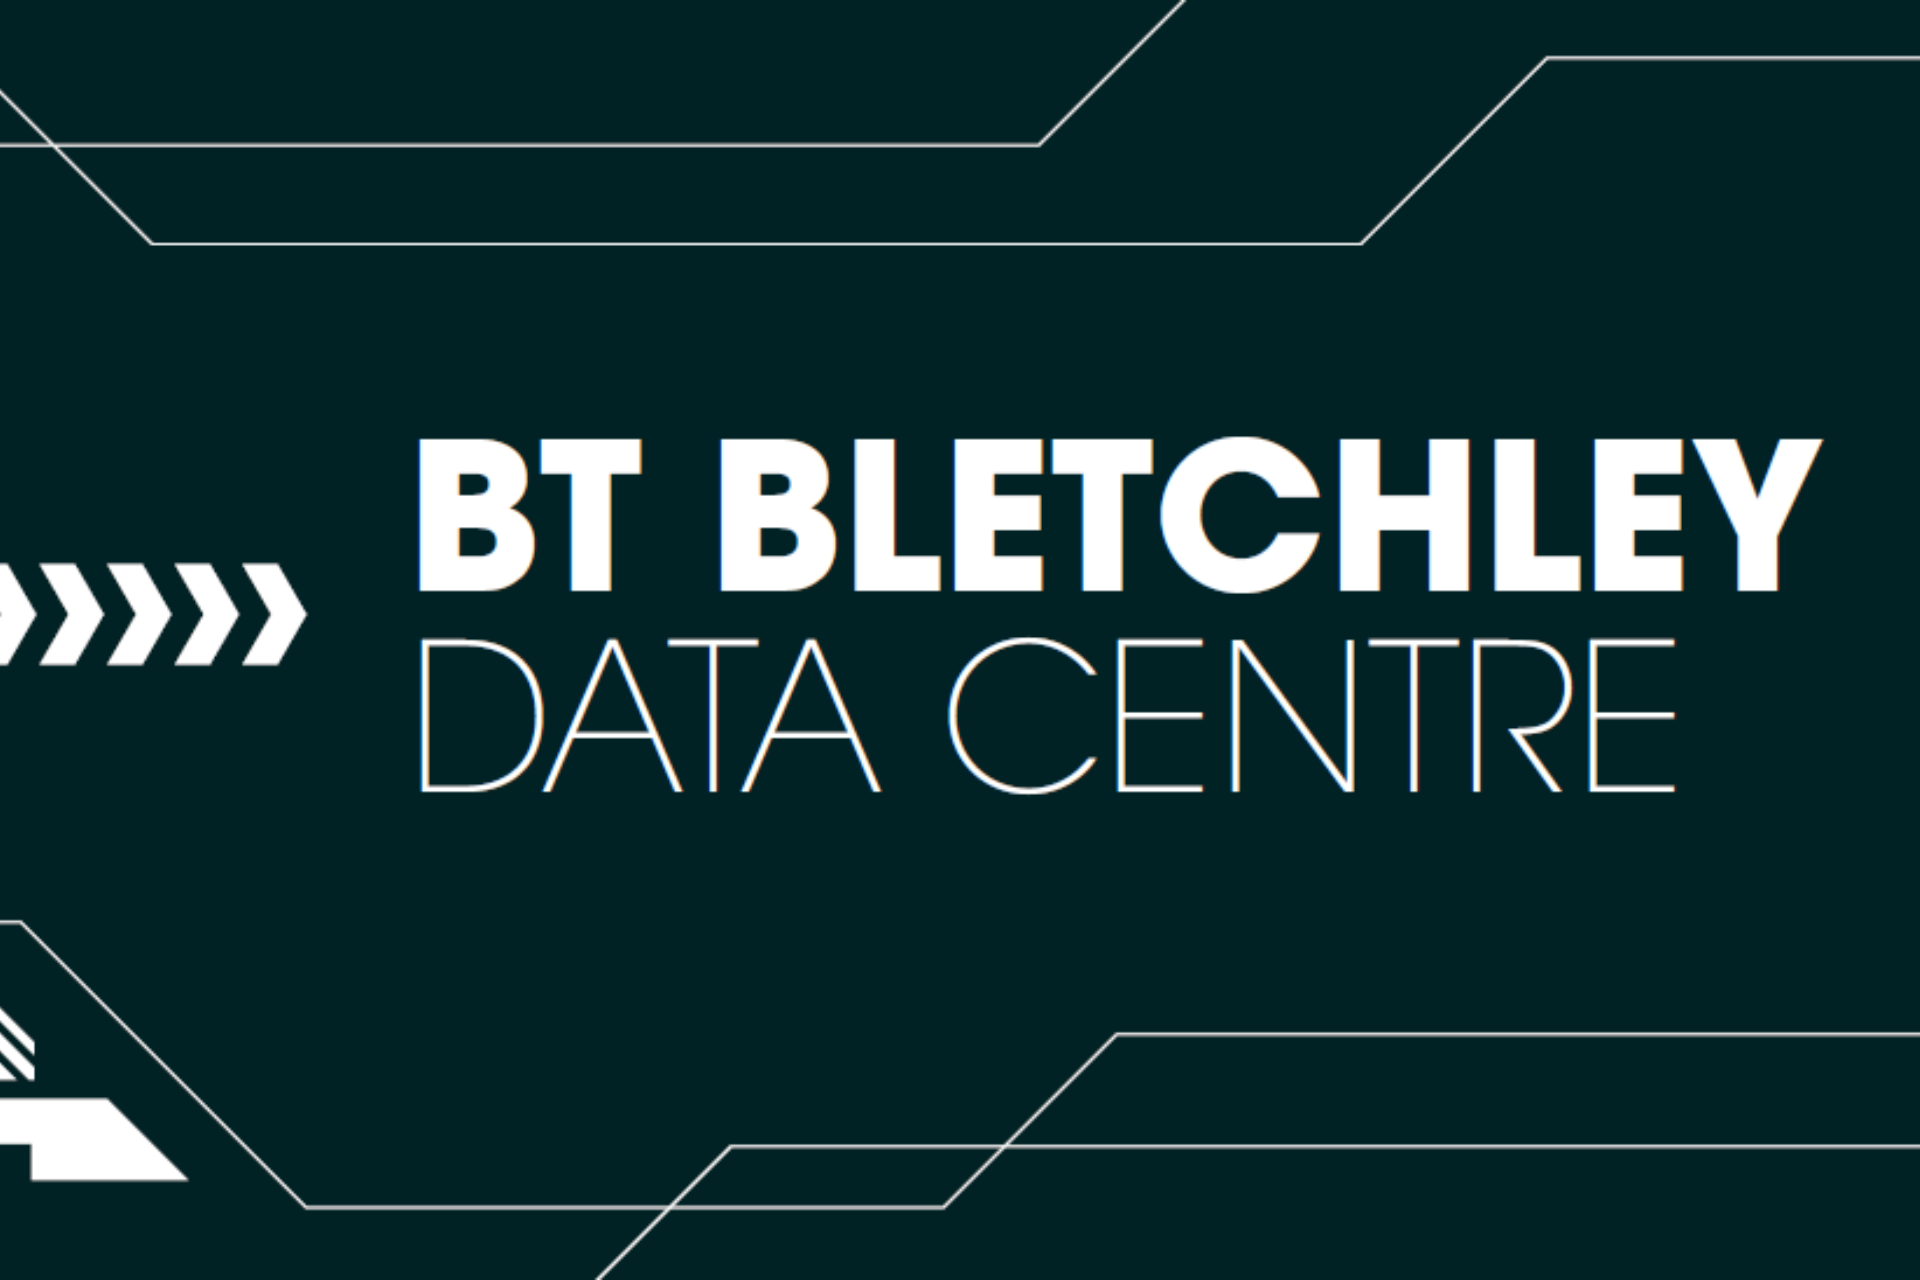 Graphic with text 'BT BLETCHLEY DATA CENTRE' in bold white letters against a dark background with abstract line patterns.